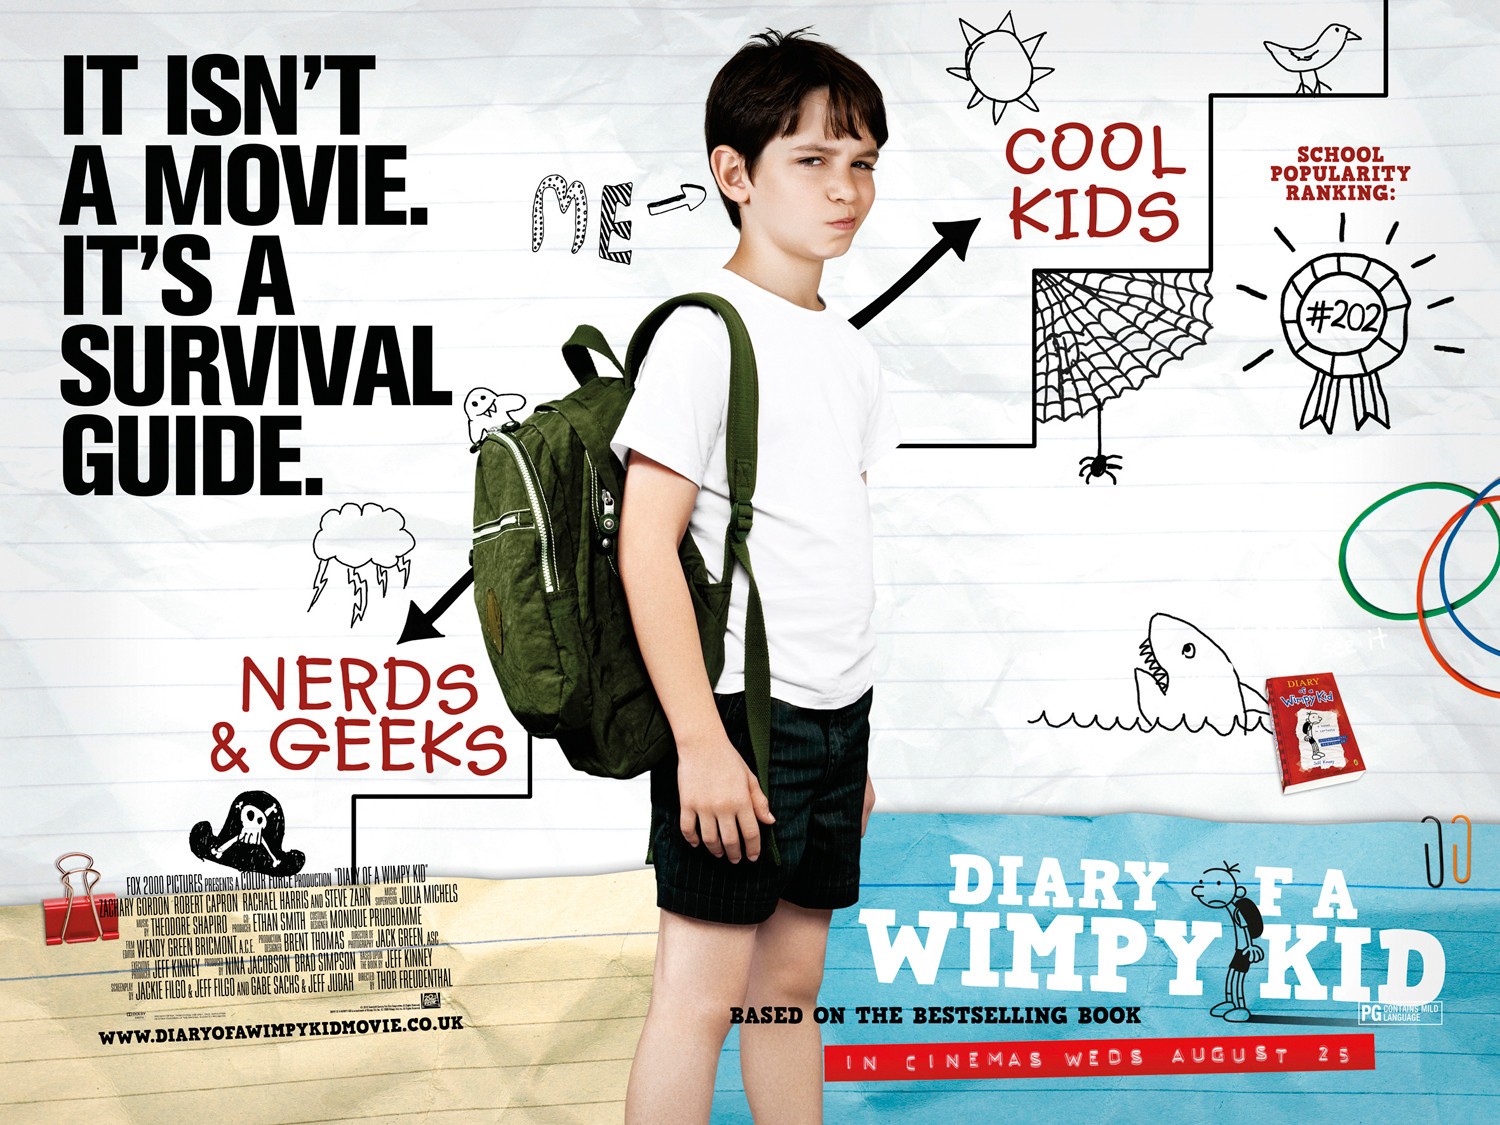 Extra Large Movie Poster Image for Diary of a Wimpy Kid (#9 of 9)